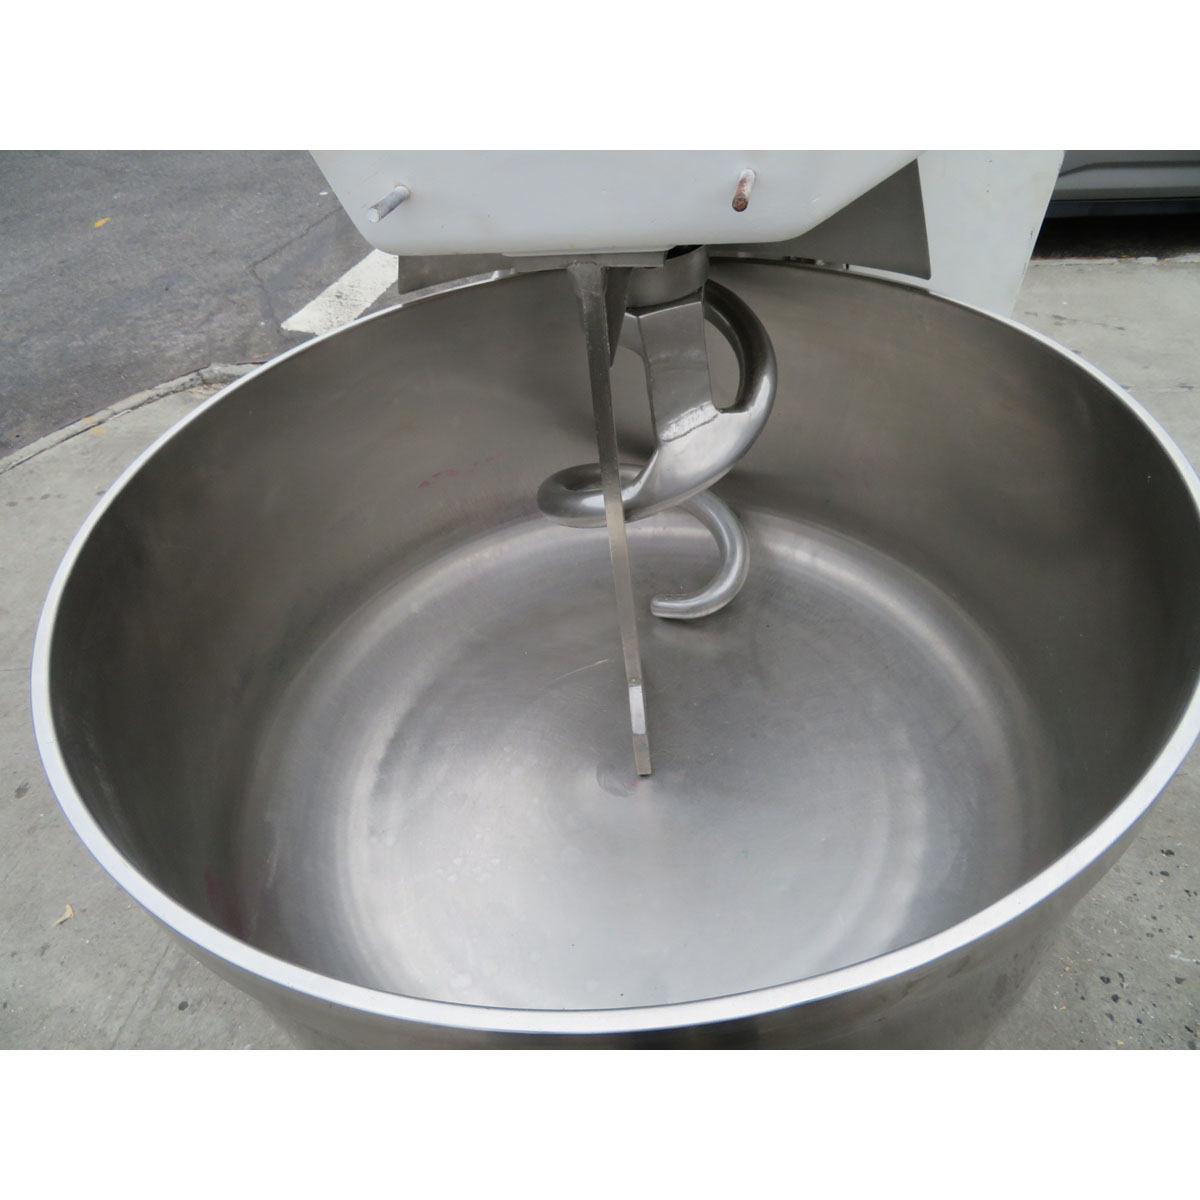 Cinelli CG/300KG Spiral Mixer 3 Phase, Used Great Condition image 4